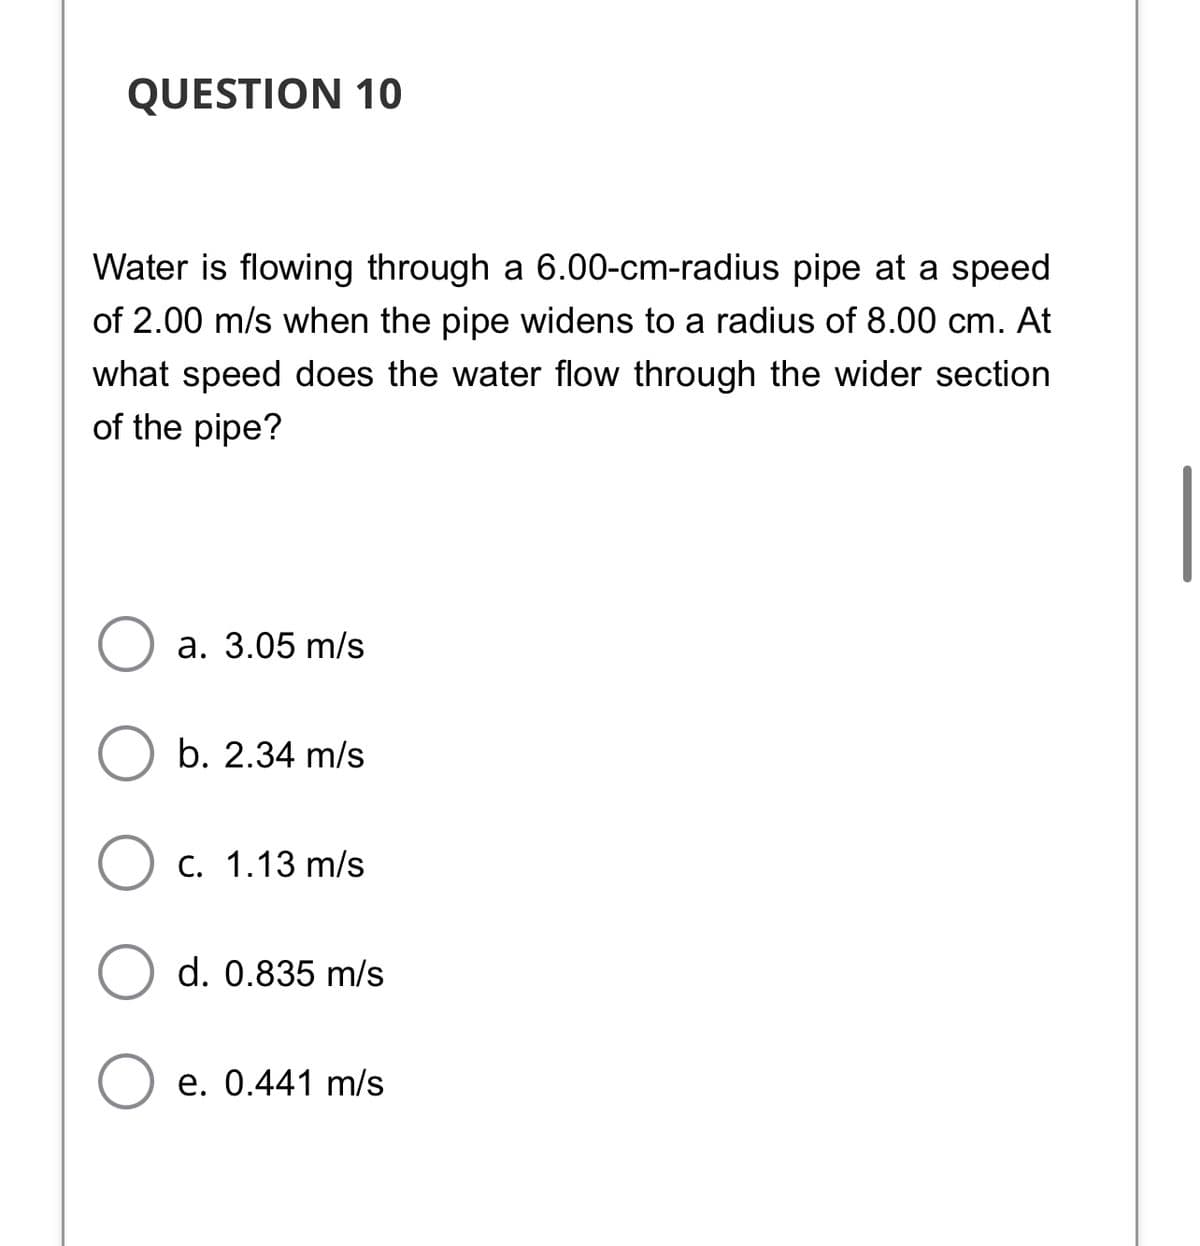 QUESTION 10
Water is flowing through a 6.00-cm-radius pipe at a speed
of 2.00 m/s when the pipe widens to a radius of 8.00 cm. At
what speed does the water flow through the wider section
of the pipe?
а. 3.05 m/s
b. 2.34 m/s
Ос. 1.13 m/s
d. 0.835 m/s
O e. 0.441 m/s
